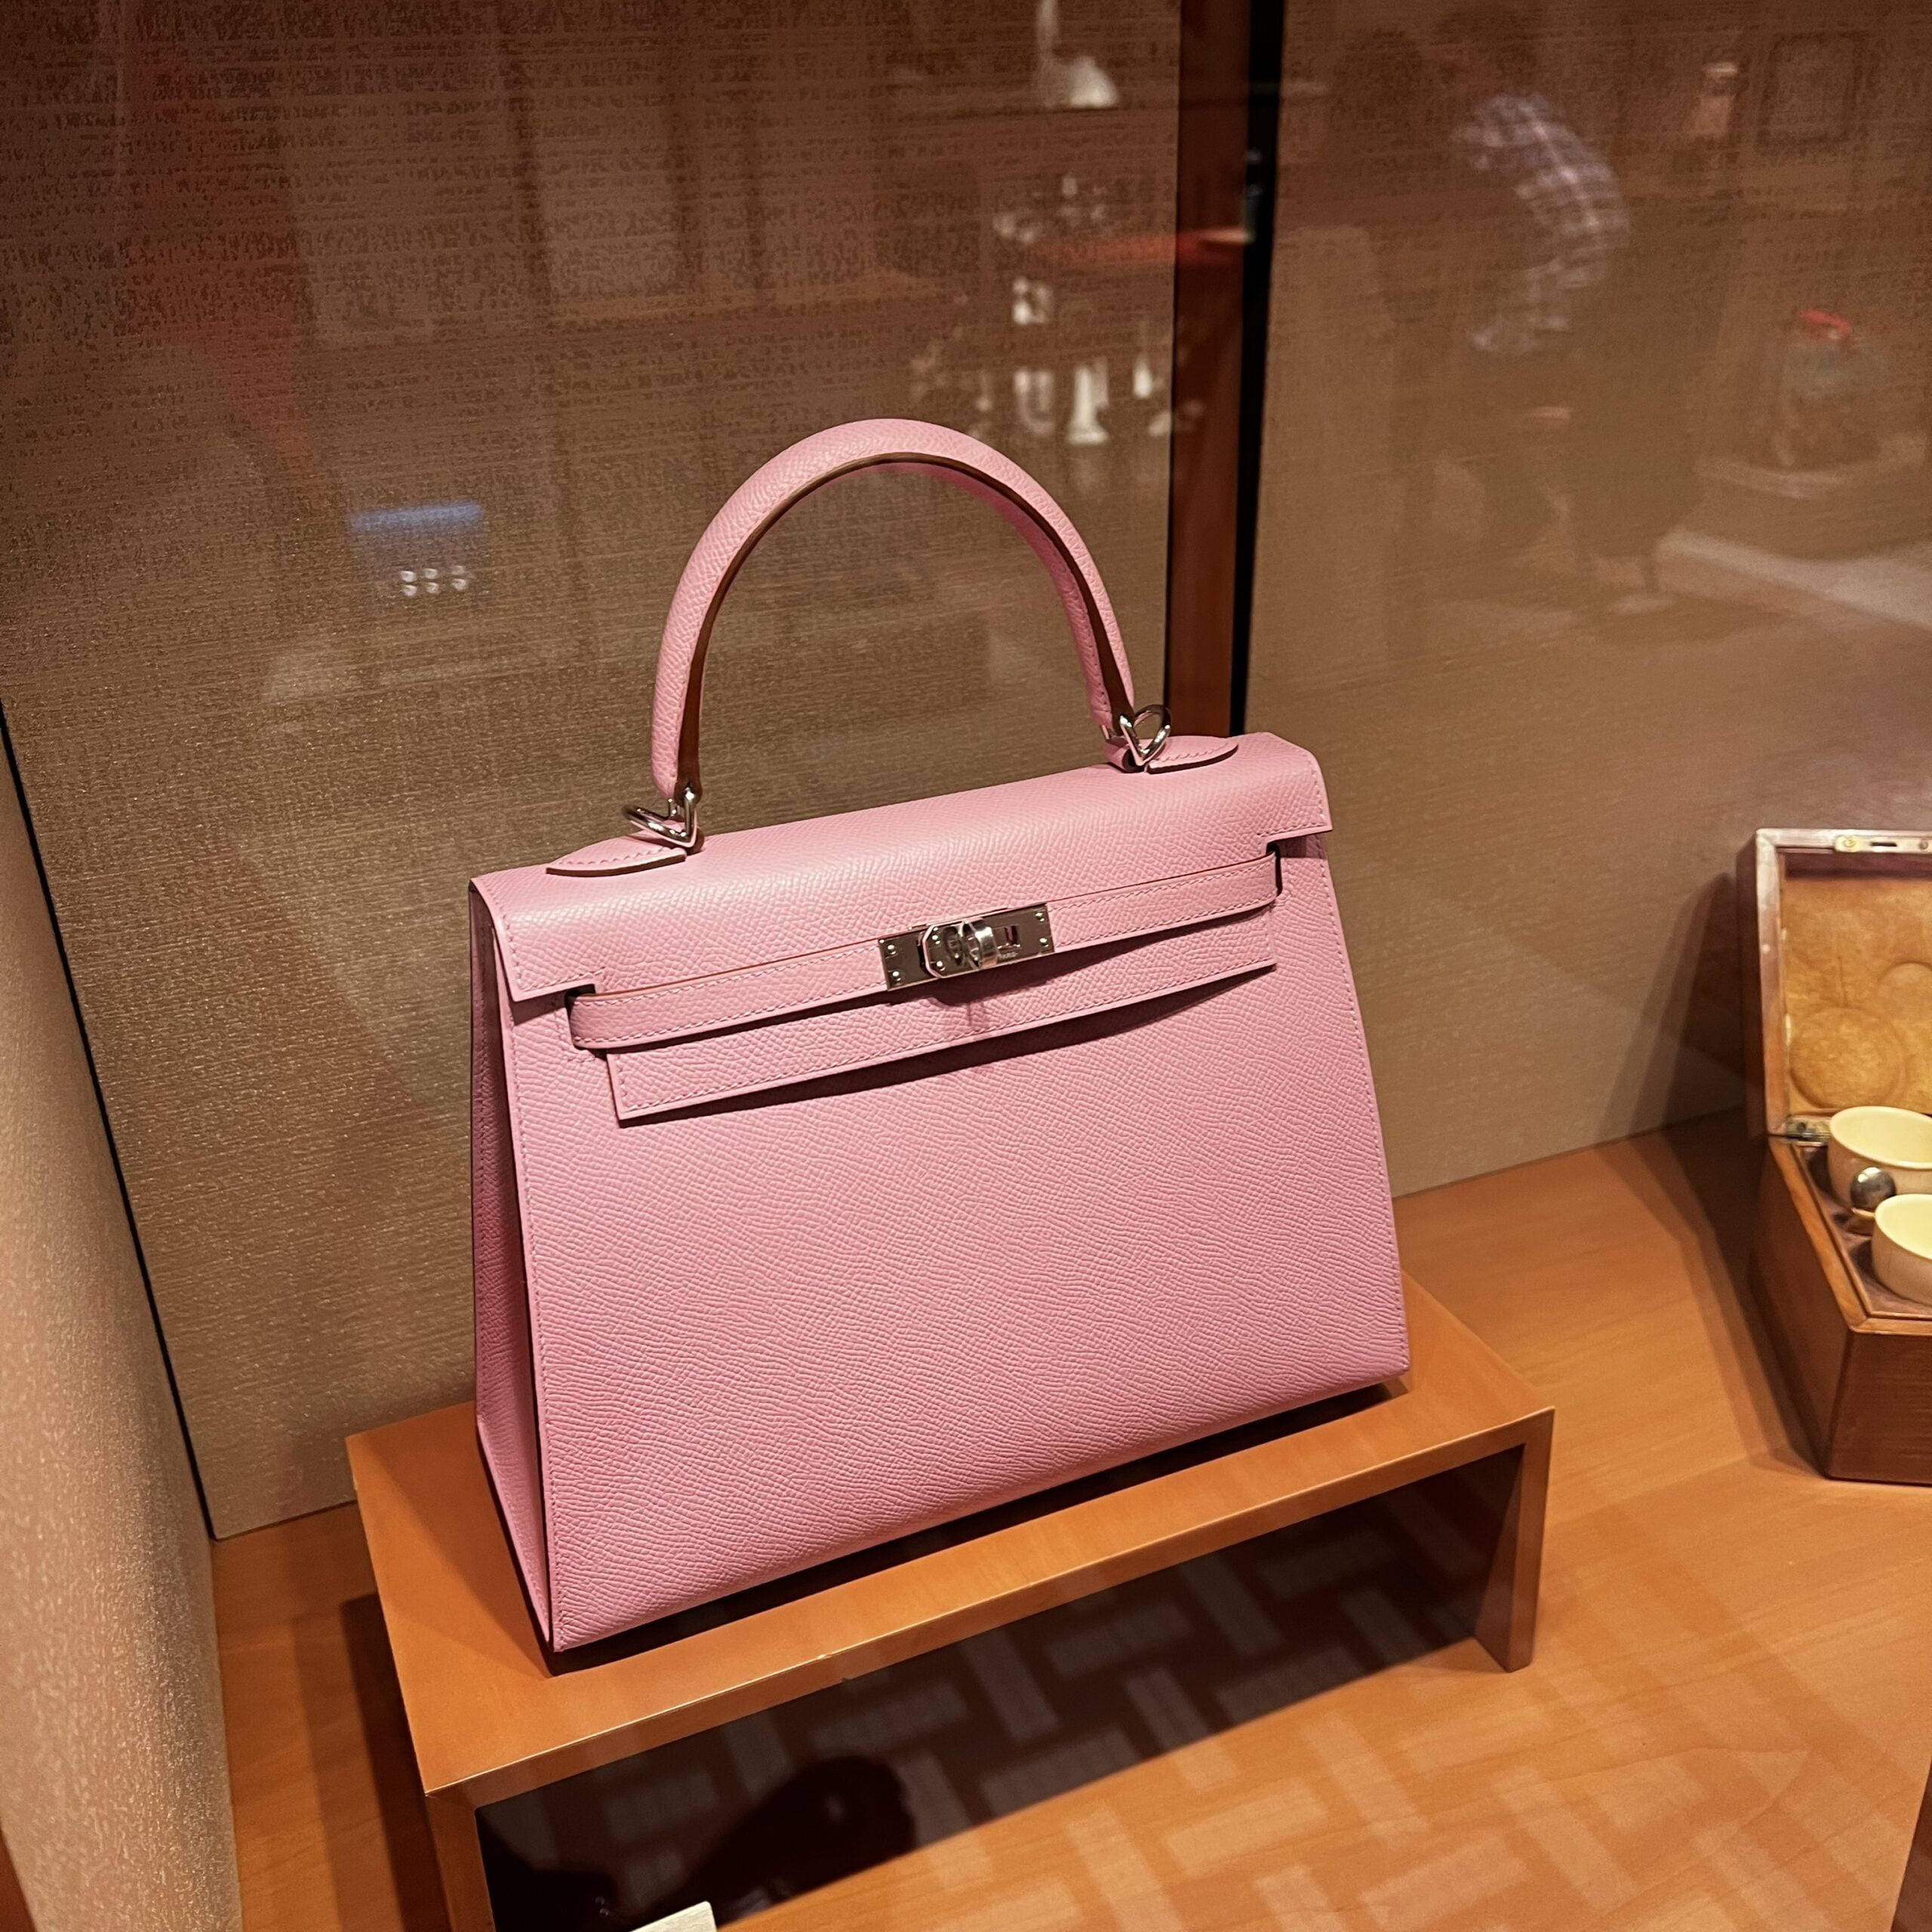 Faubourg Fever: All About the New Hermès Icon